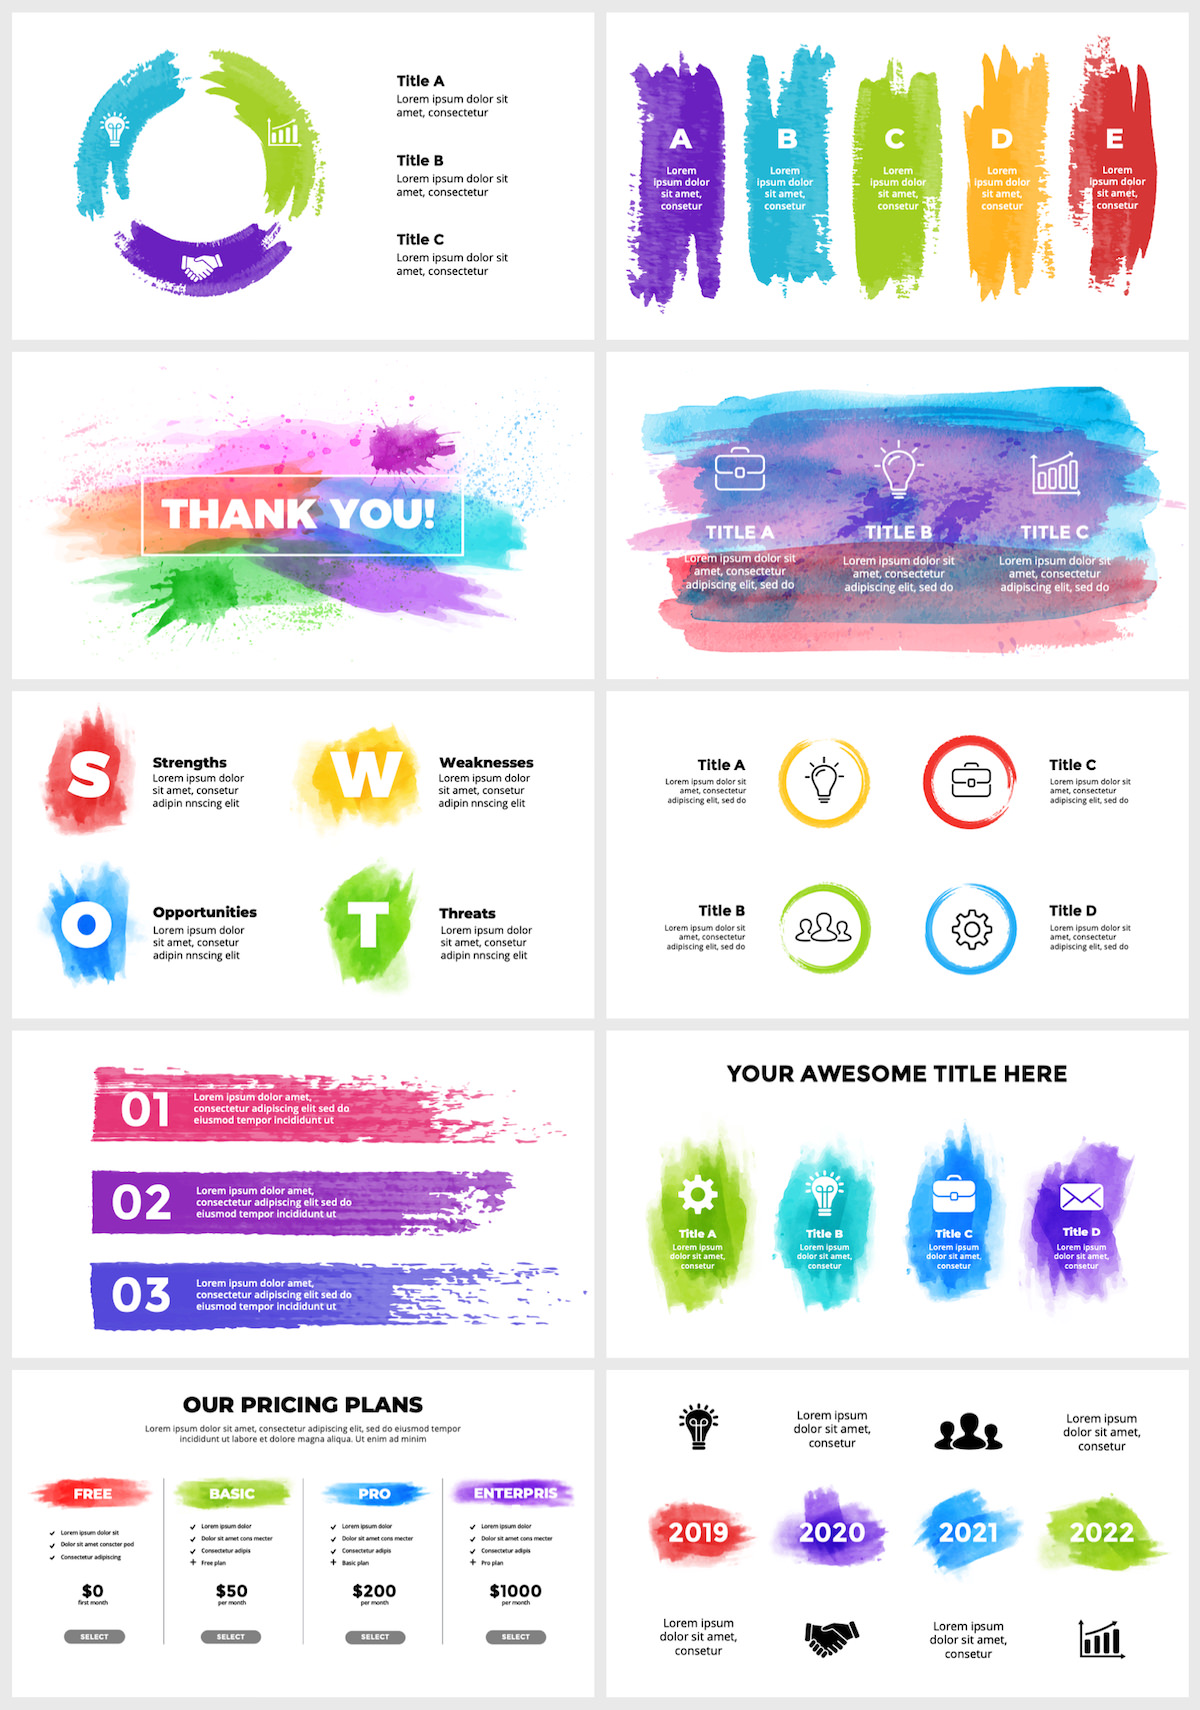 Wowly - 3500 Infographics & Presentation Templates! Updated! PowerPoint Canva Figma Sketch Ai Psd. - 124